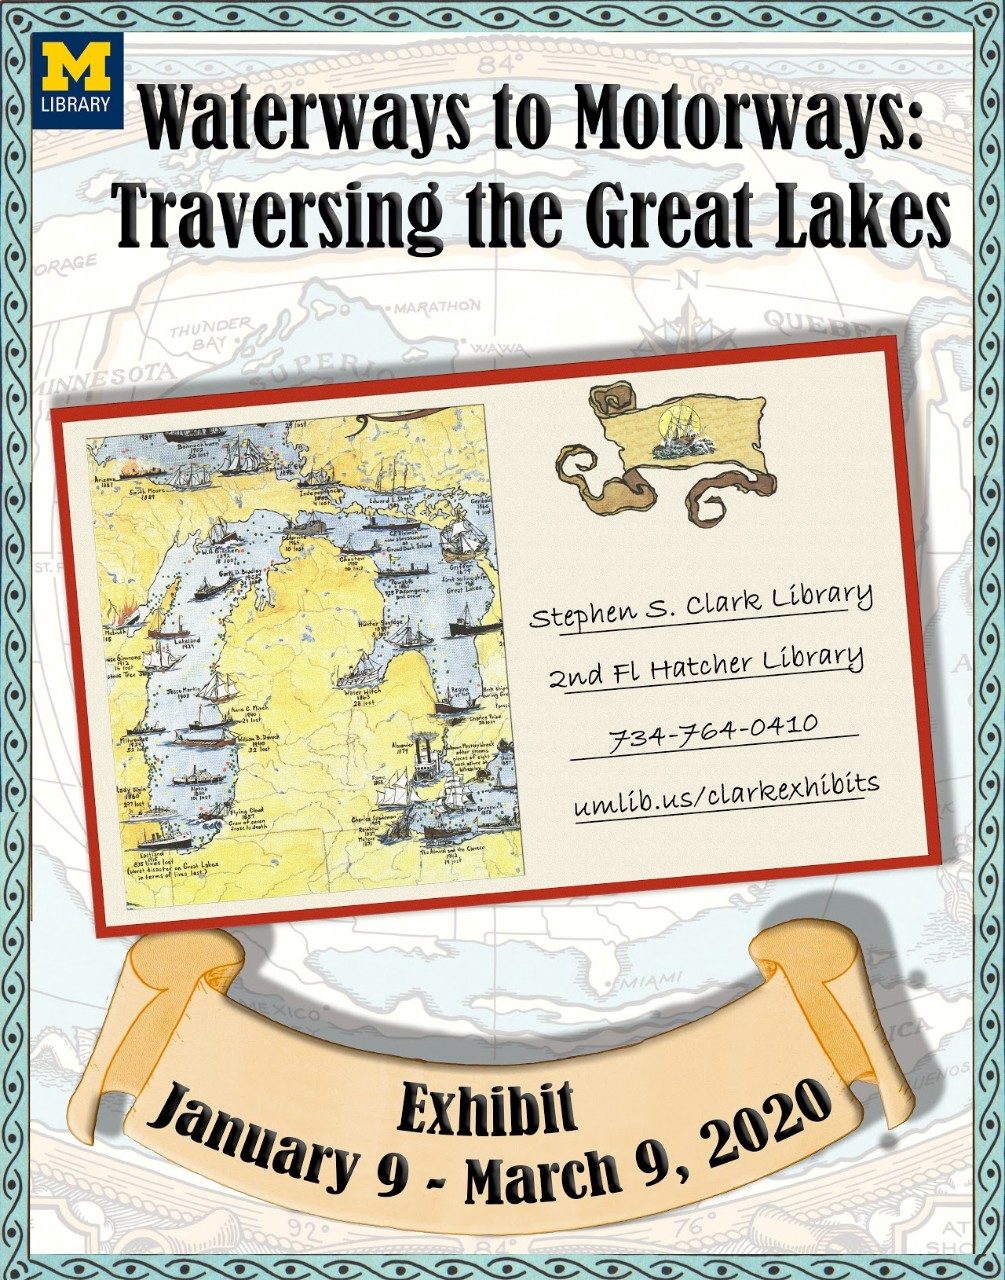 Flyer announcing exhibit title and dates along with a map of the Michigan penninsulas